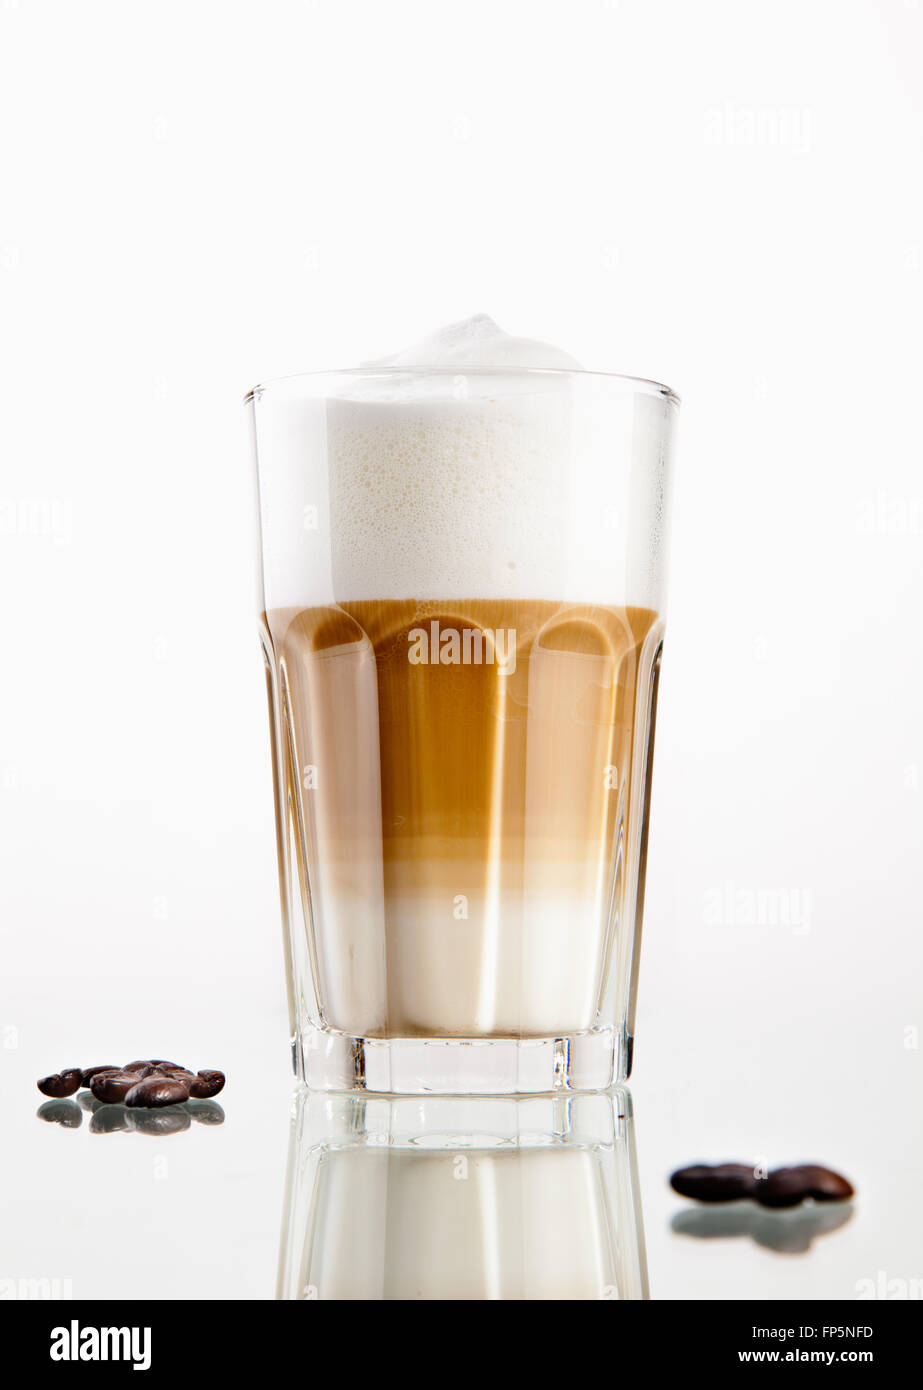 https://c8.alamy.com/comp/FP5NFD/latte-macchiato-coffee-in-a-glass-isolated-on-white-background-FP5NFD.jpg